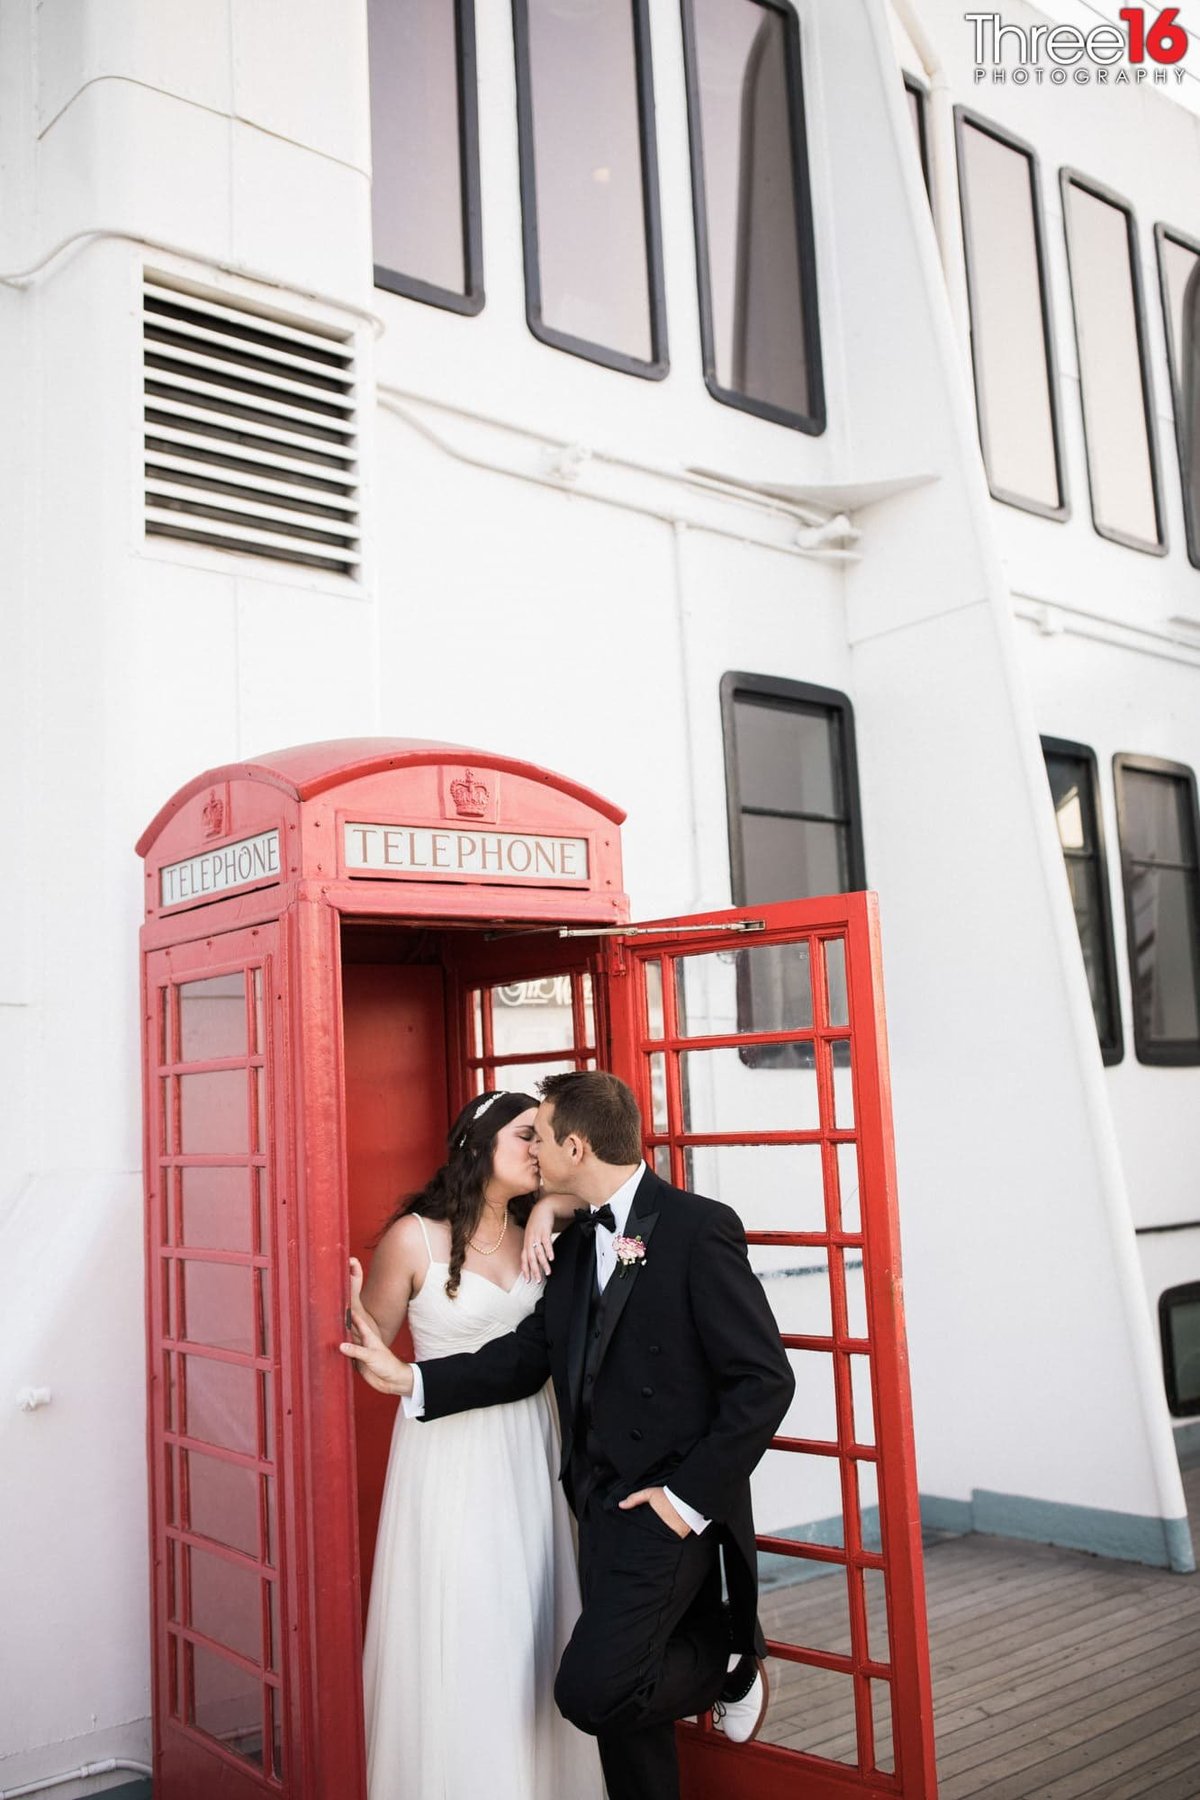 Bride and Groom share a kiss in an old style British red phone booth